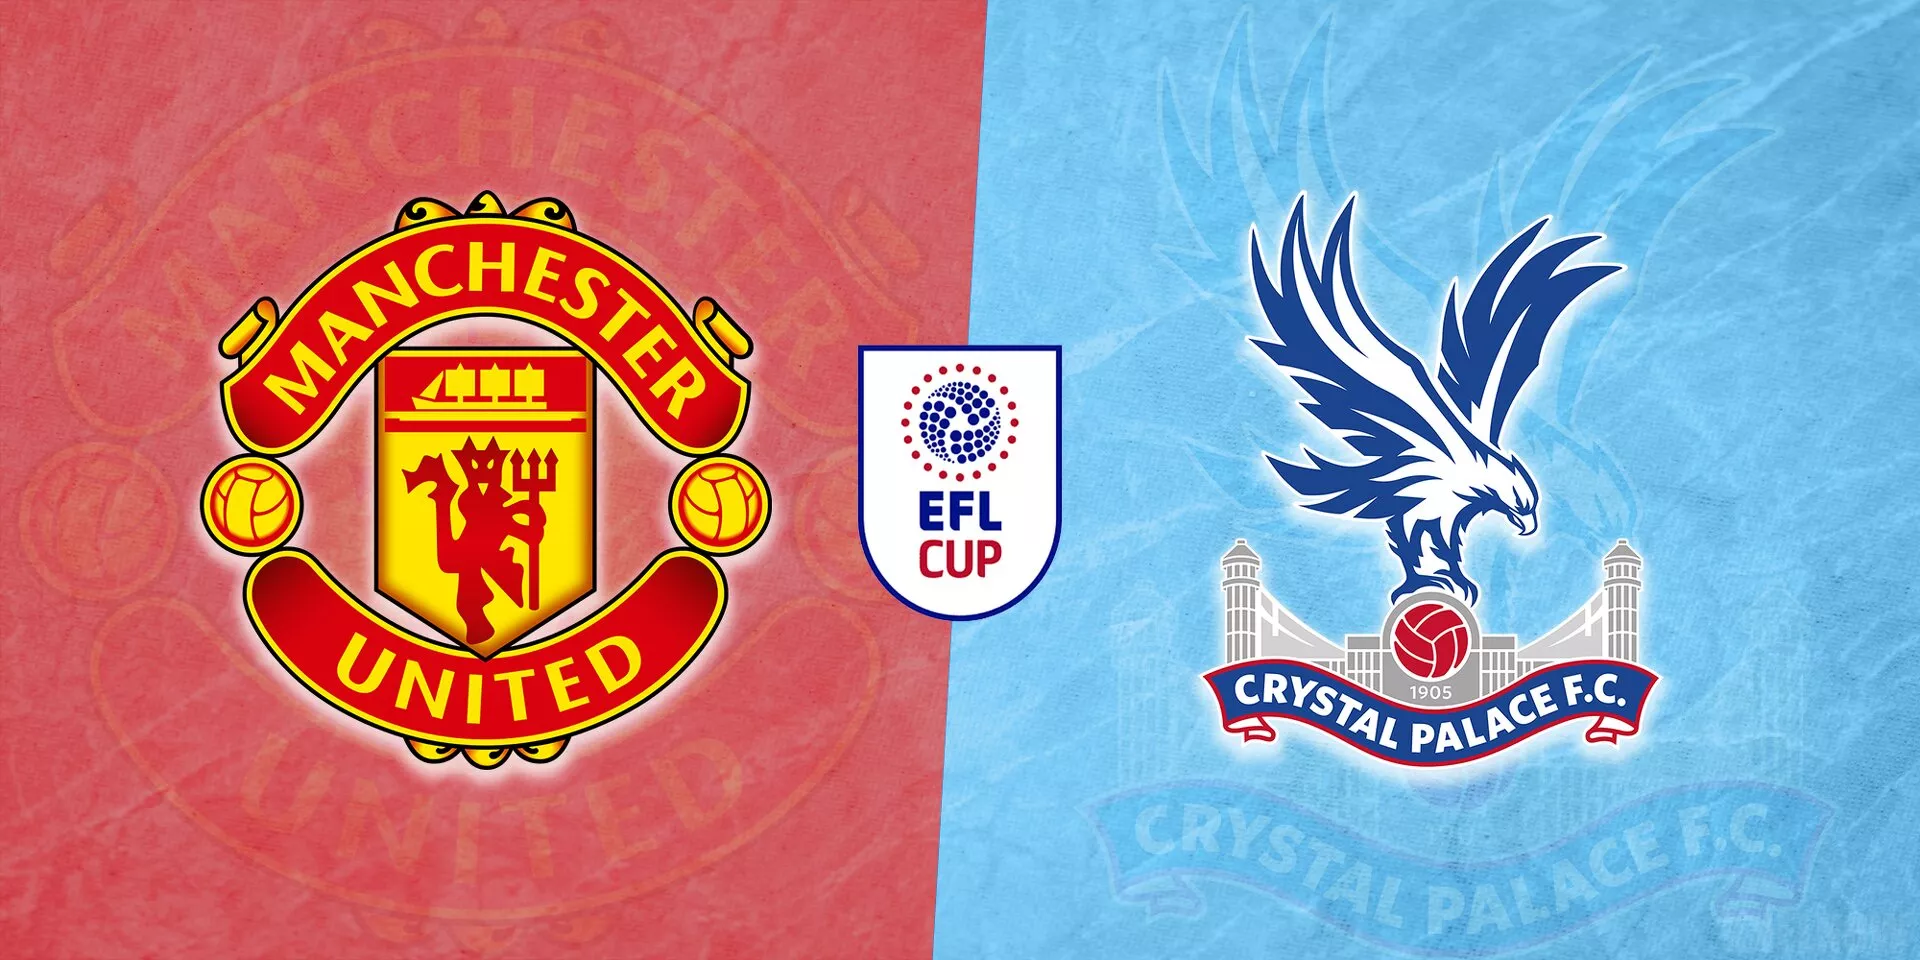 EFL Cup: Manchester United vs Crystal Palace: Predicted lineup, injury news, head-to-head, telecast